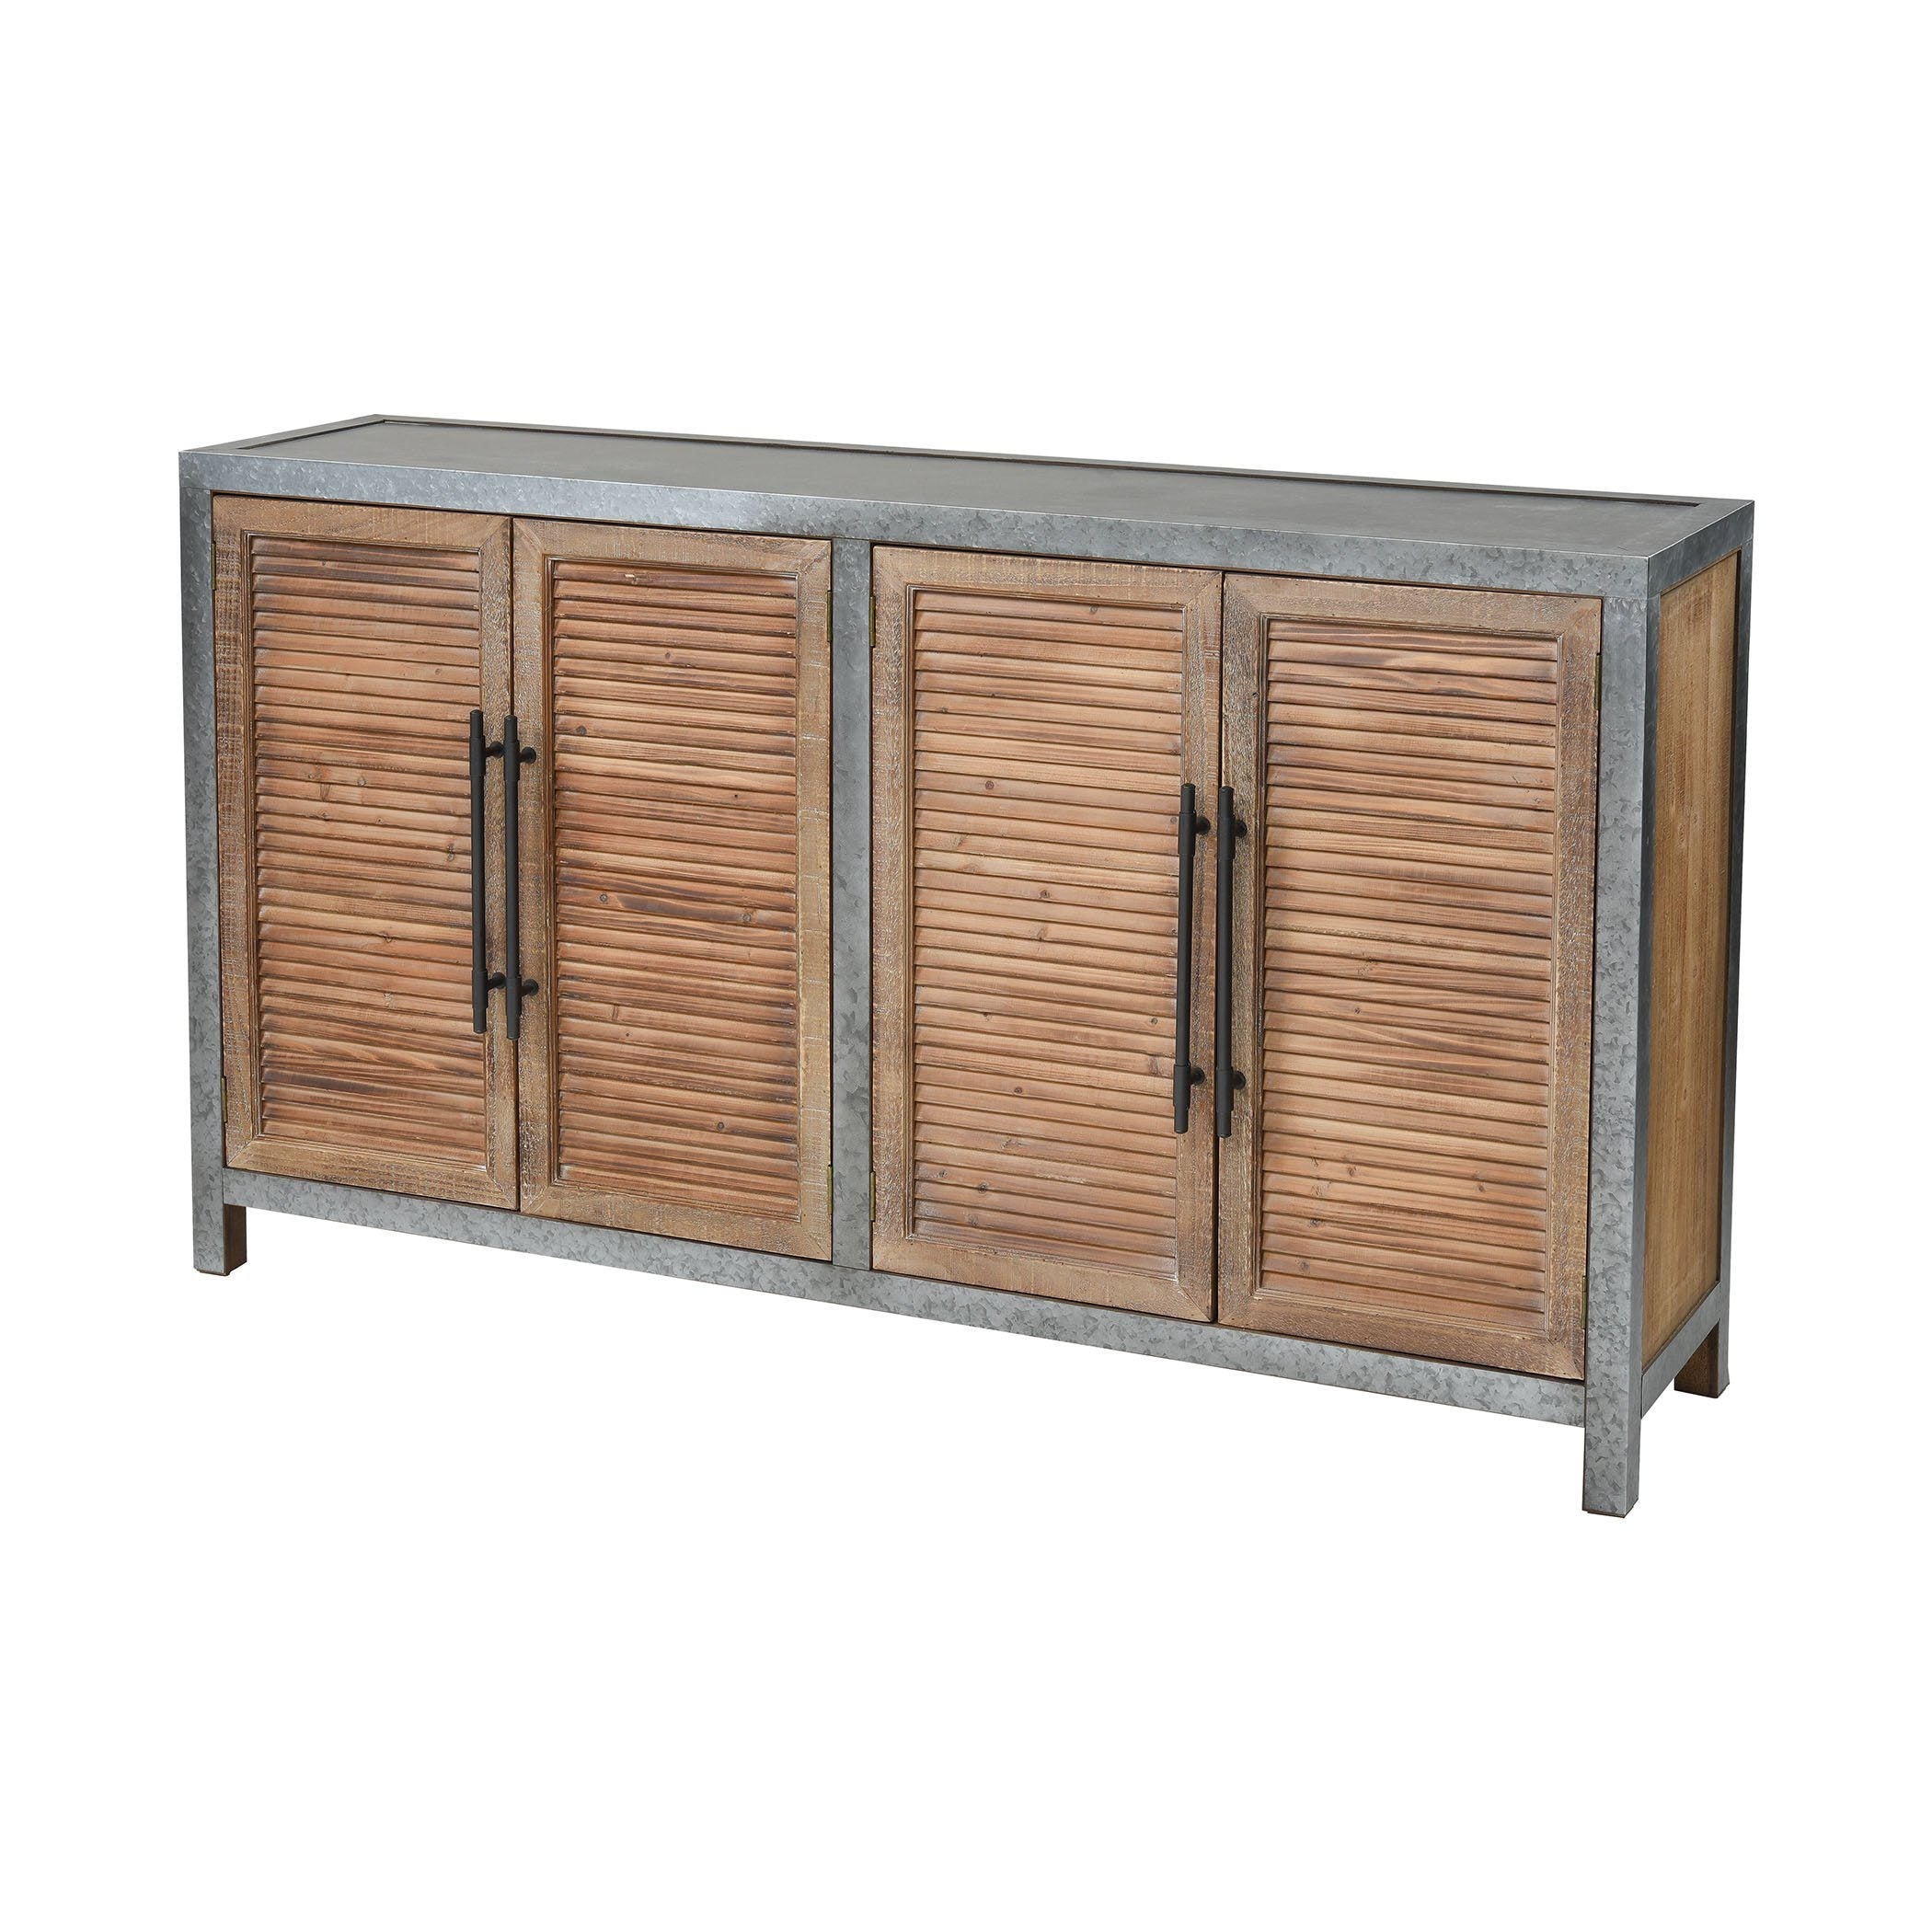 Badlands Drifted Oak with Aged Iron 2-Door Wood and Metal Cabinet Furniture Sterling 